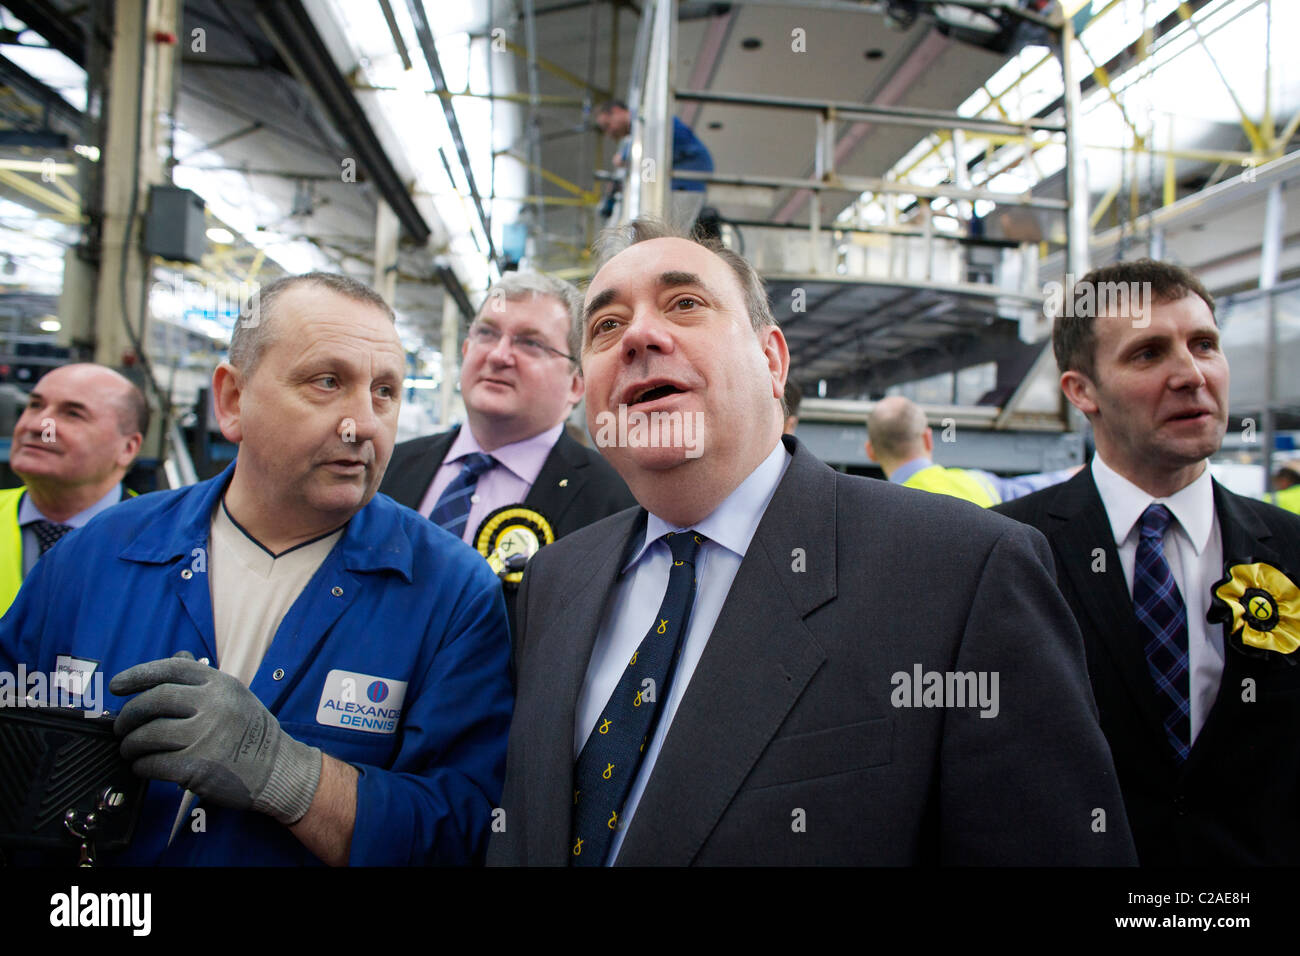 Falkirk, Scotland, GBR - 07 April: Alex Salmond, leader of the Scottish National Party, meeting shop floor workers while visiting the Alexander Dennis bus and coach factory in Falkirk on Thursday 07 April 2011. In recent weeks the company has secured orders for over 500 buses, worth in the region of £100 million.  (Photo: Copyright © David Gordon) Stock Photo